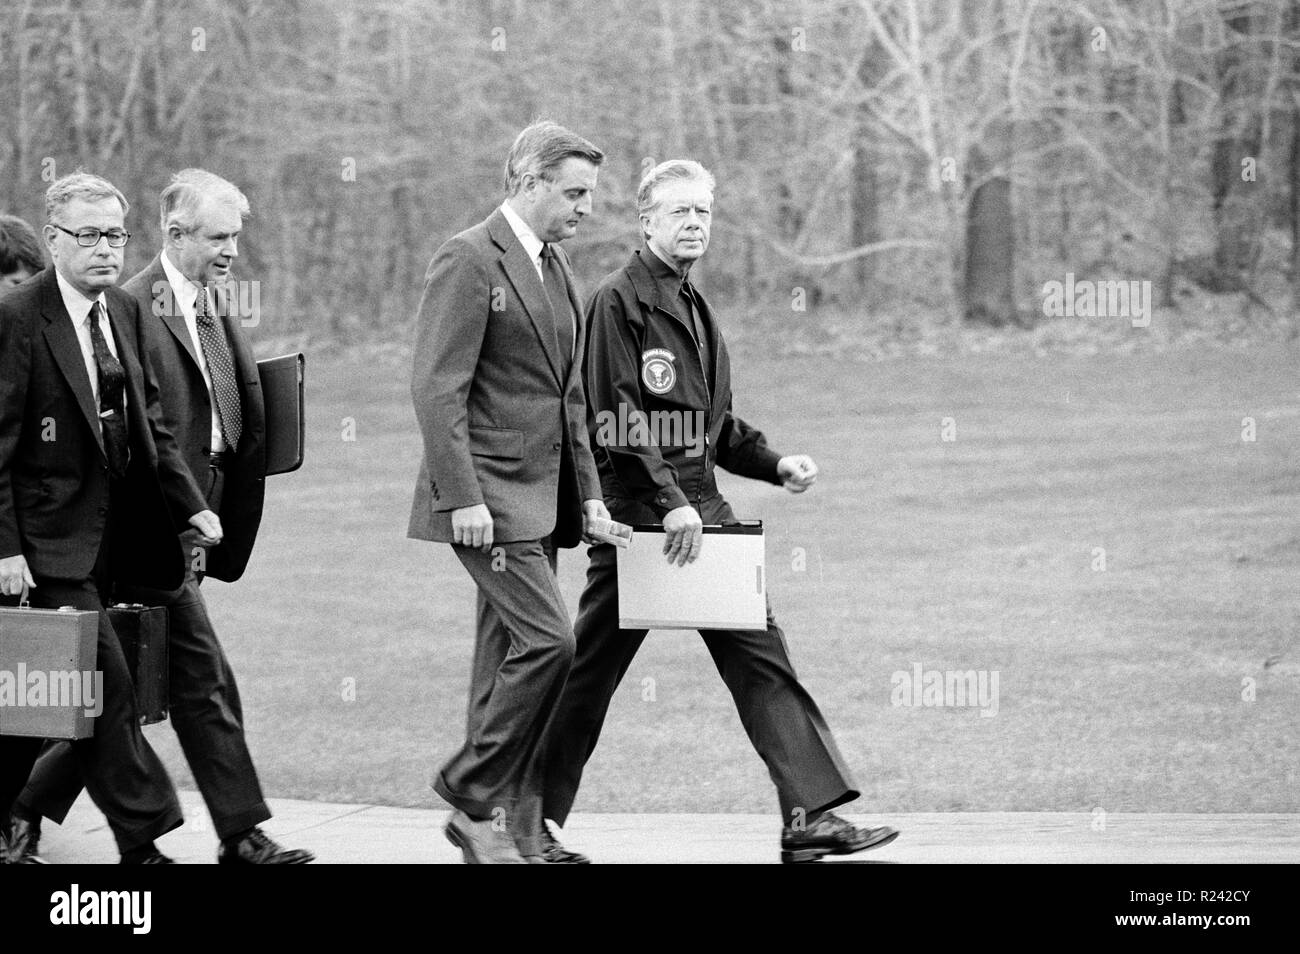 Photograph of President Jimmy Carter, Vice President Walter Mondale, Secretary of State Cyrus Vance and Secretary of Defence Harold Brown on their way to meet about the Iran Hostage Crisis. Dated 1979 Stock Photo